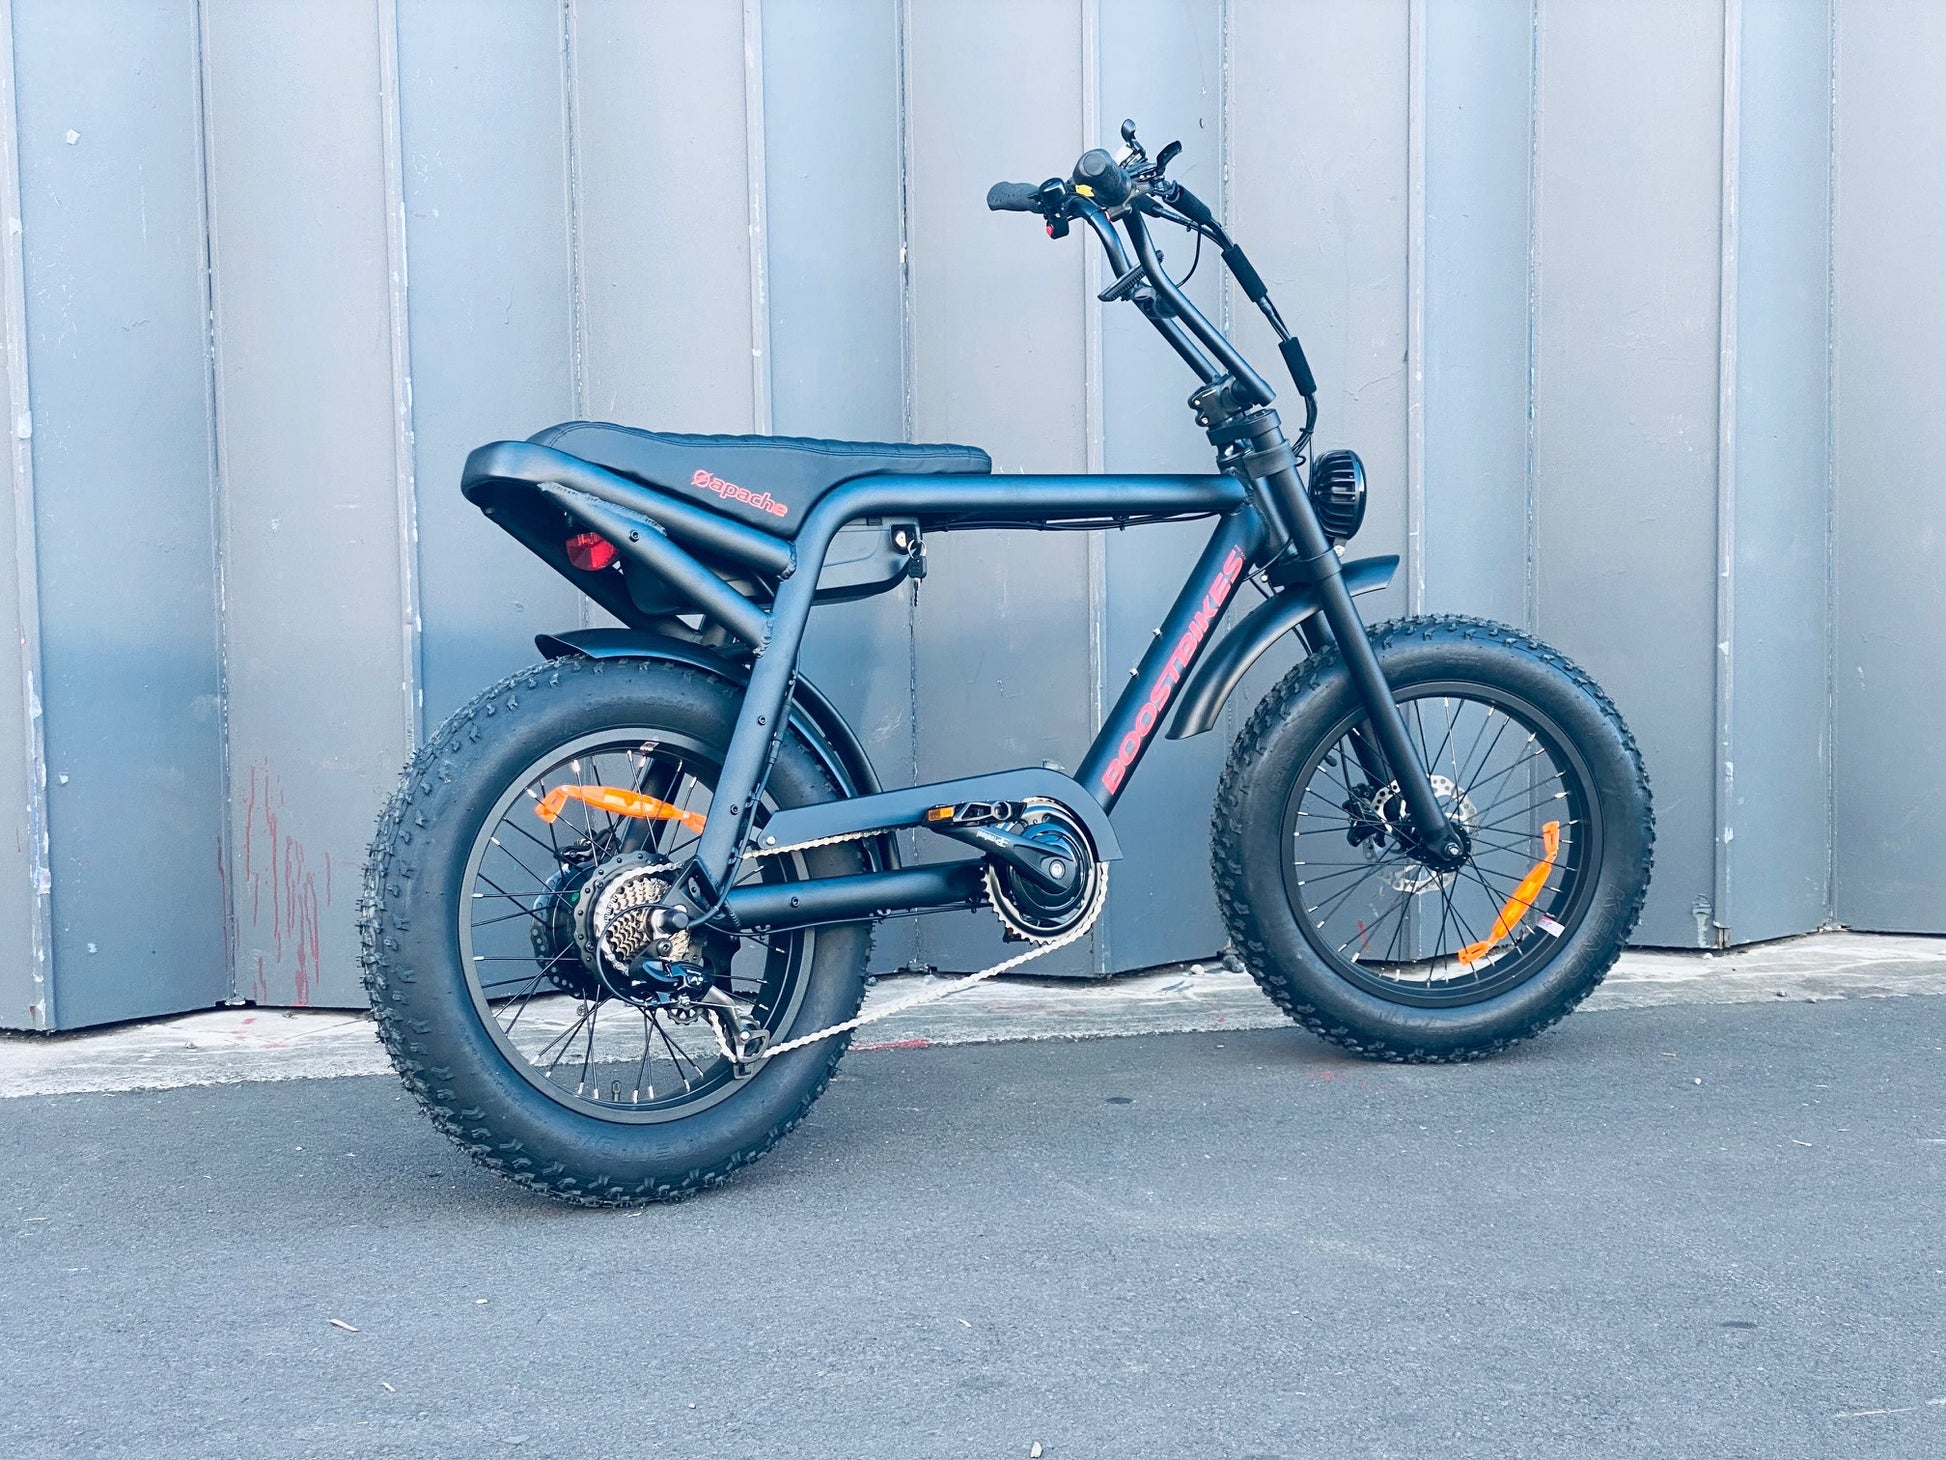 Apache Electric Bike from Boostbikes. Awesome Super 73 style.